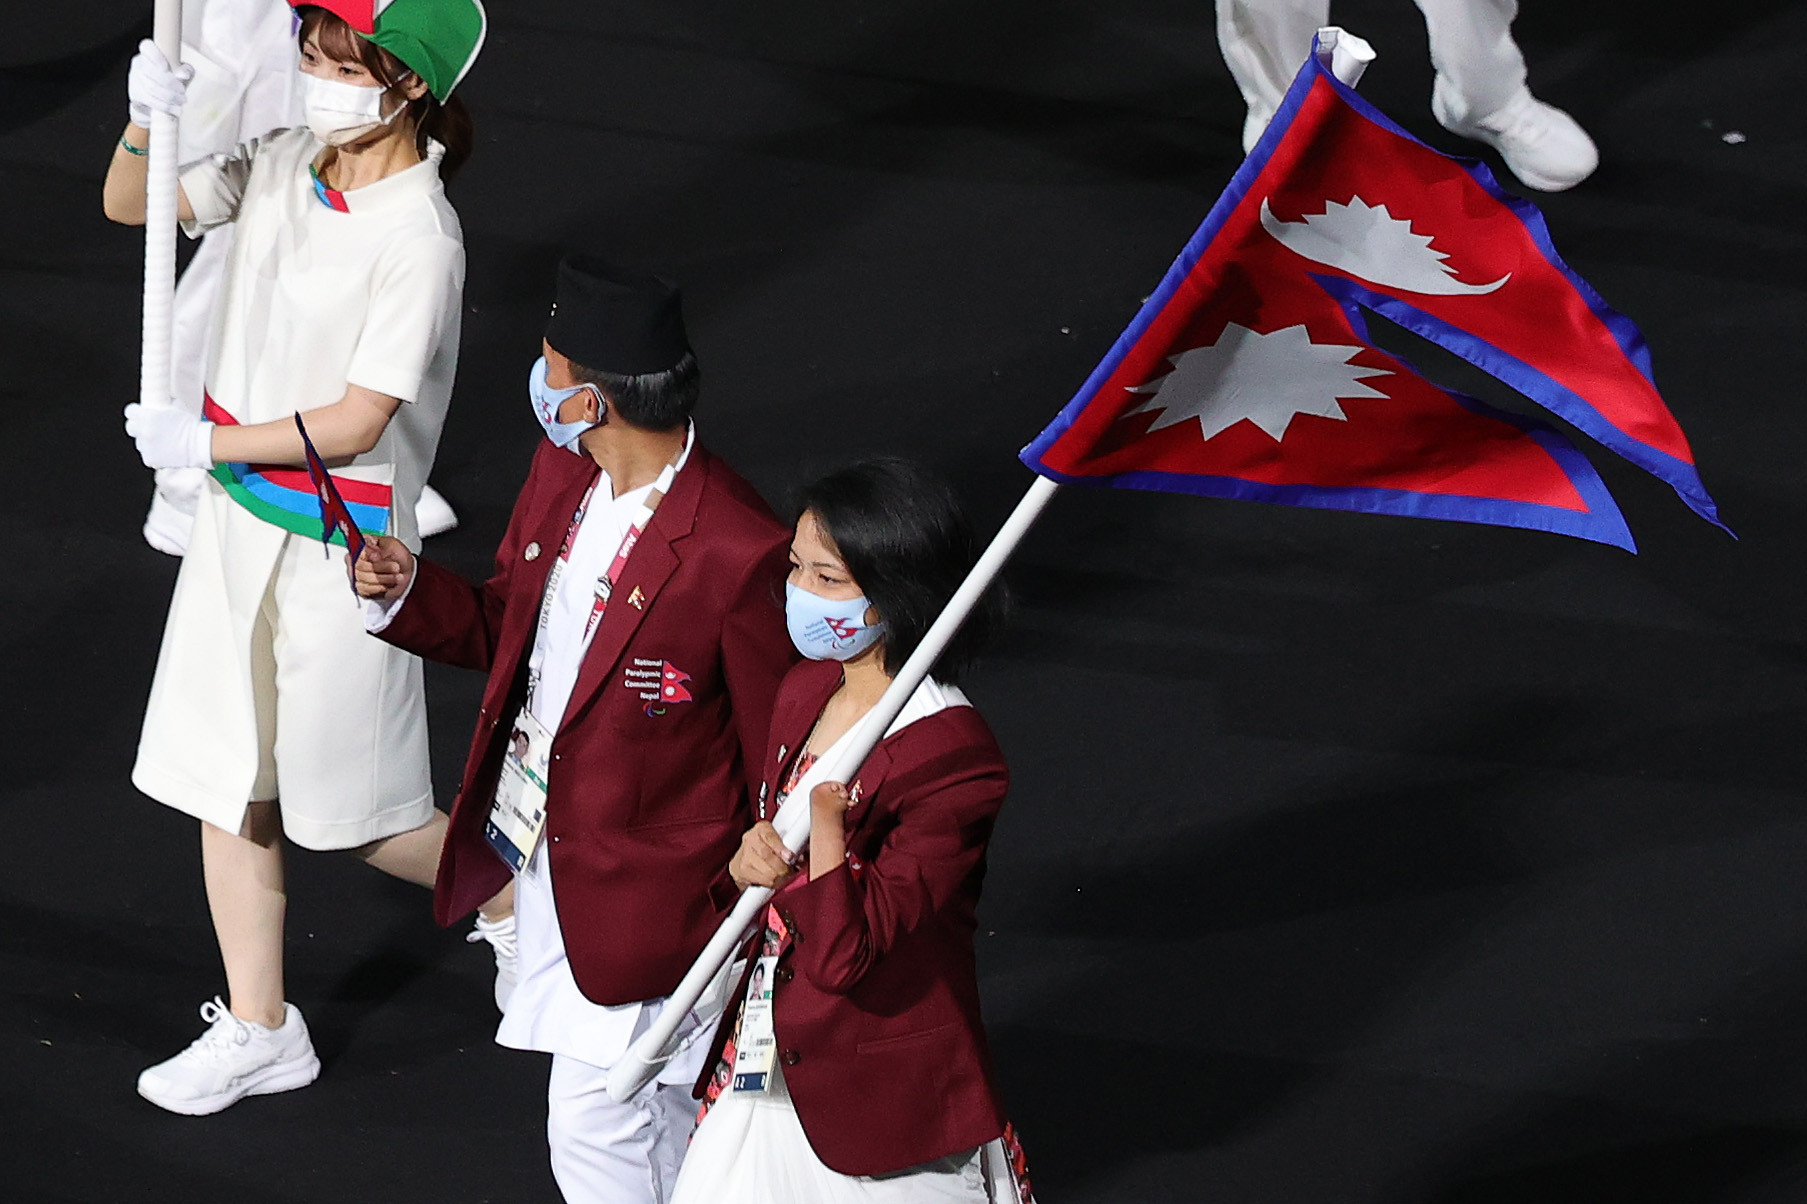 Palesha Goverdhan carried Nepal's flag in the Tokyo 2020 Opening Ceremony ©Getty Images